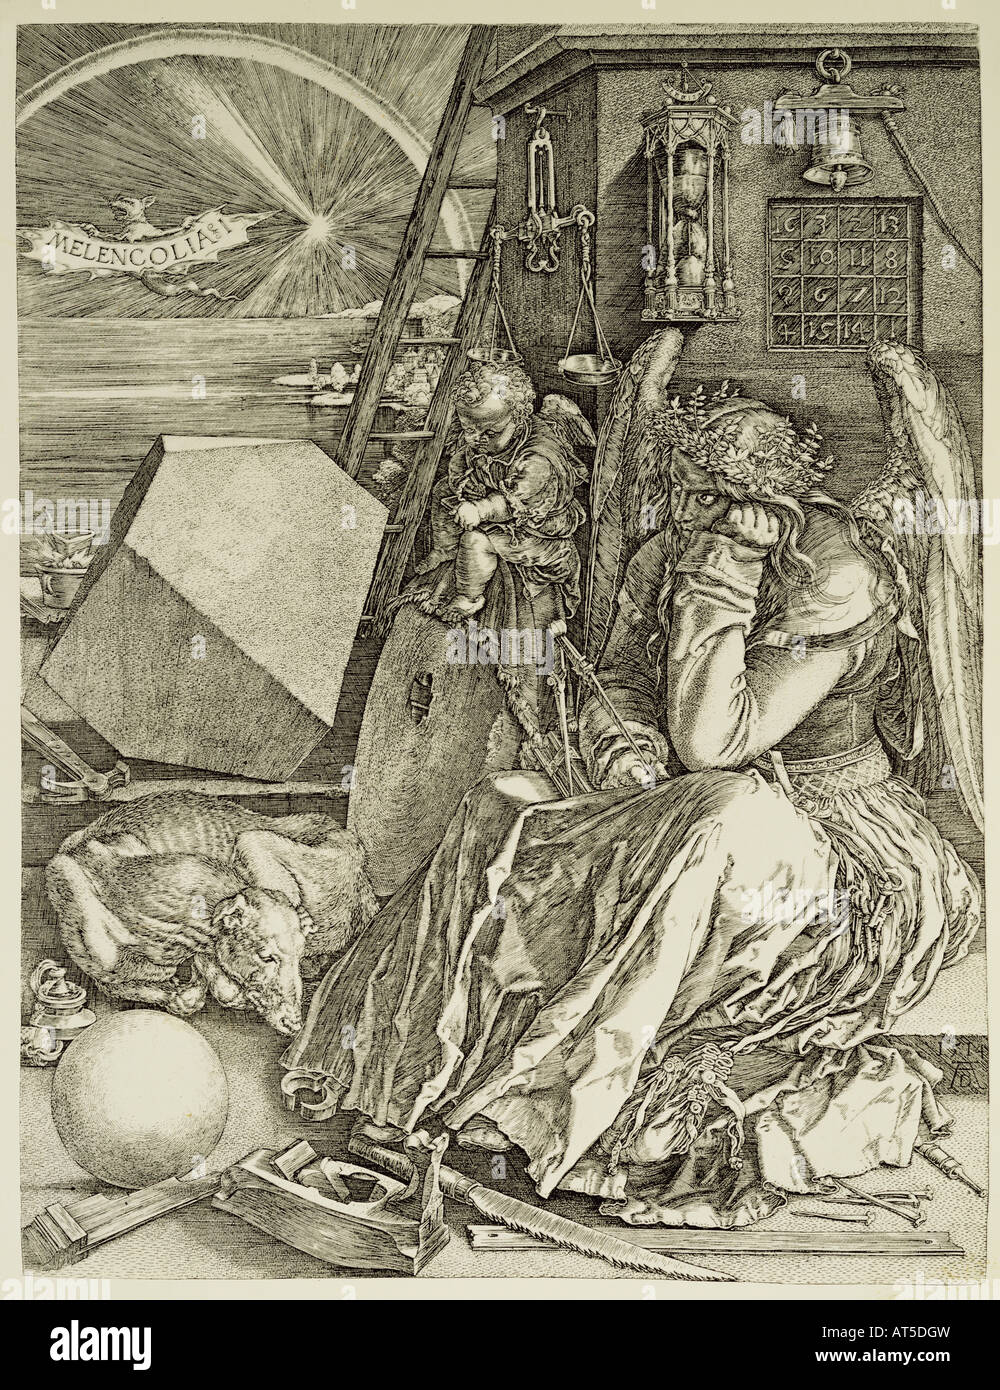 fine arts, Durer, Albrecht (1471 - 1528), copper engraving, 'Melencolia' (Melancholy), 1514, 24 cm x 18.6 cm, private collection, Artist's Copyright has not to be cleared Stock Photo